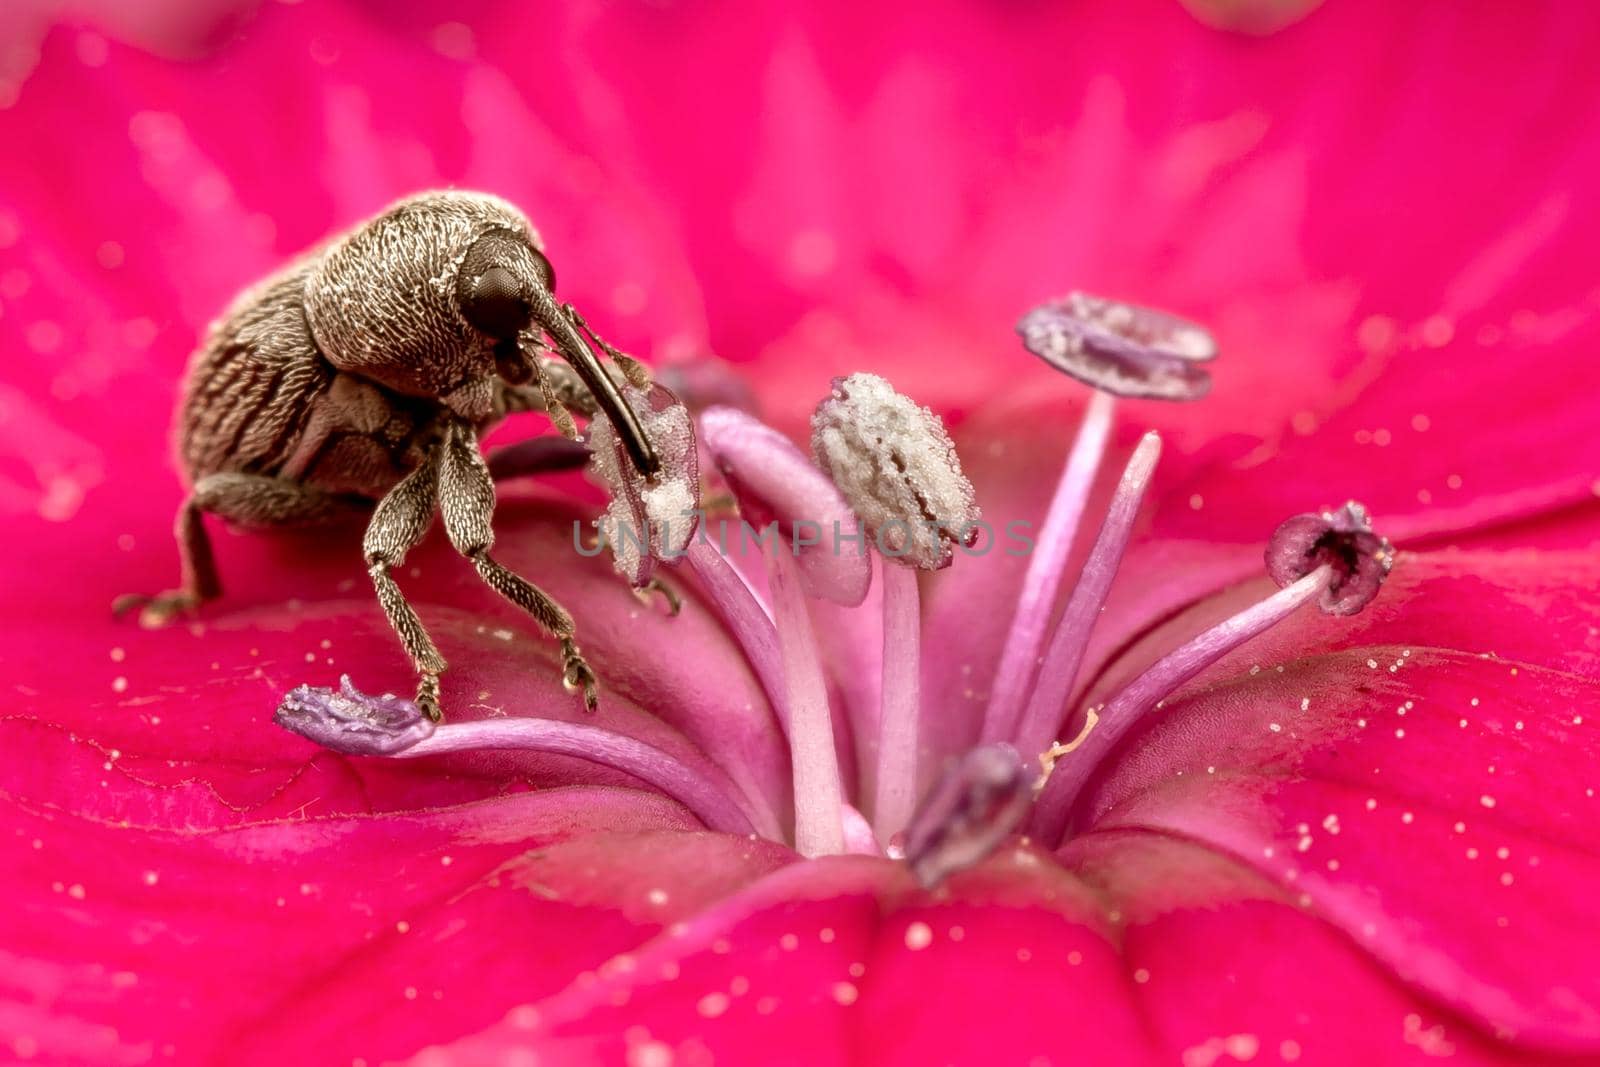 Brown Hylobius bug eating pollen on a bright pink flower bud
